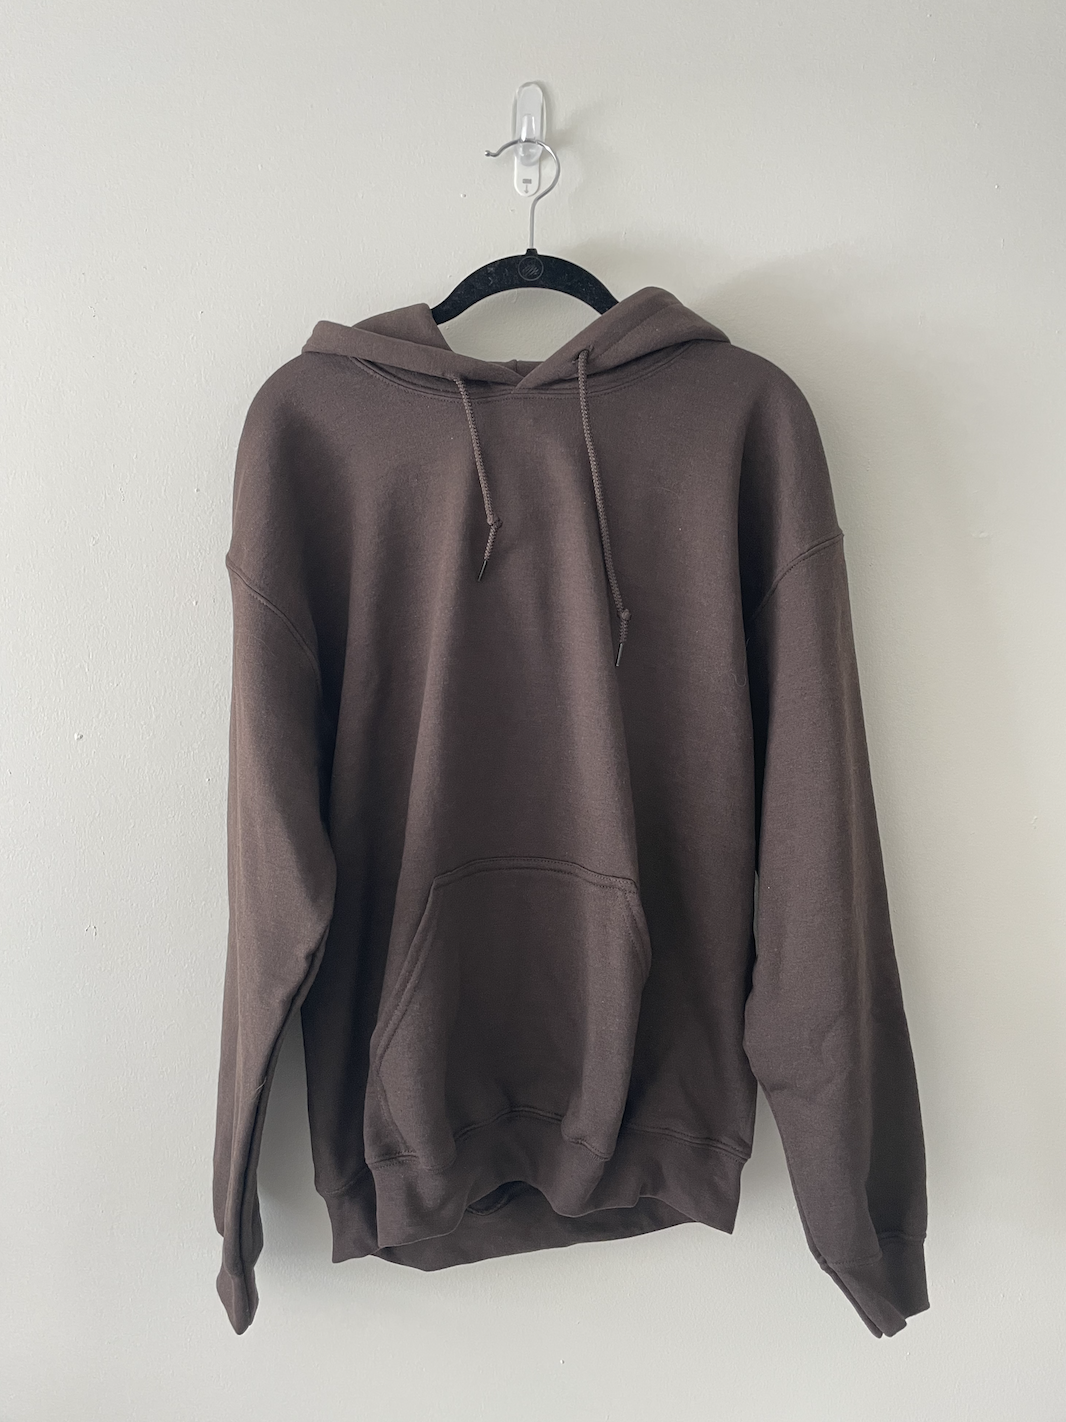 Don't Be So Hard On Yourself Hoodie - Brown